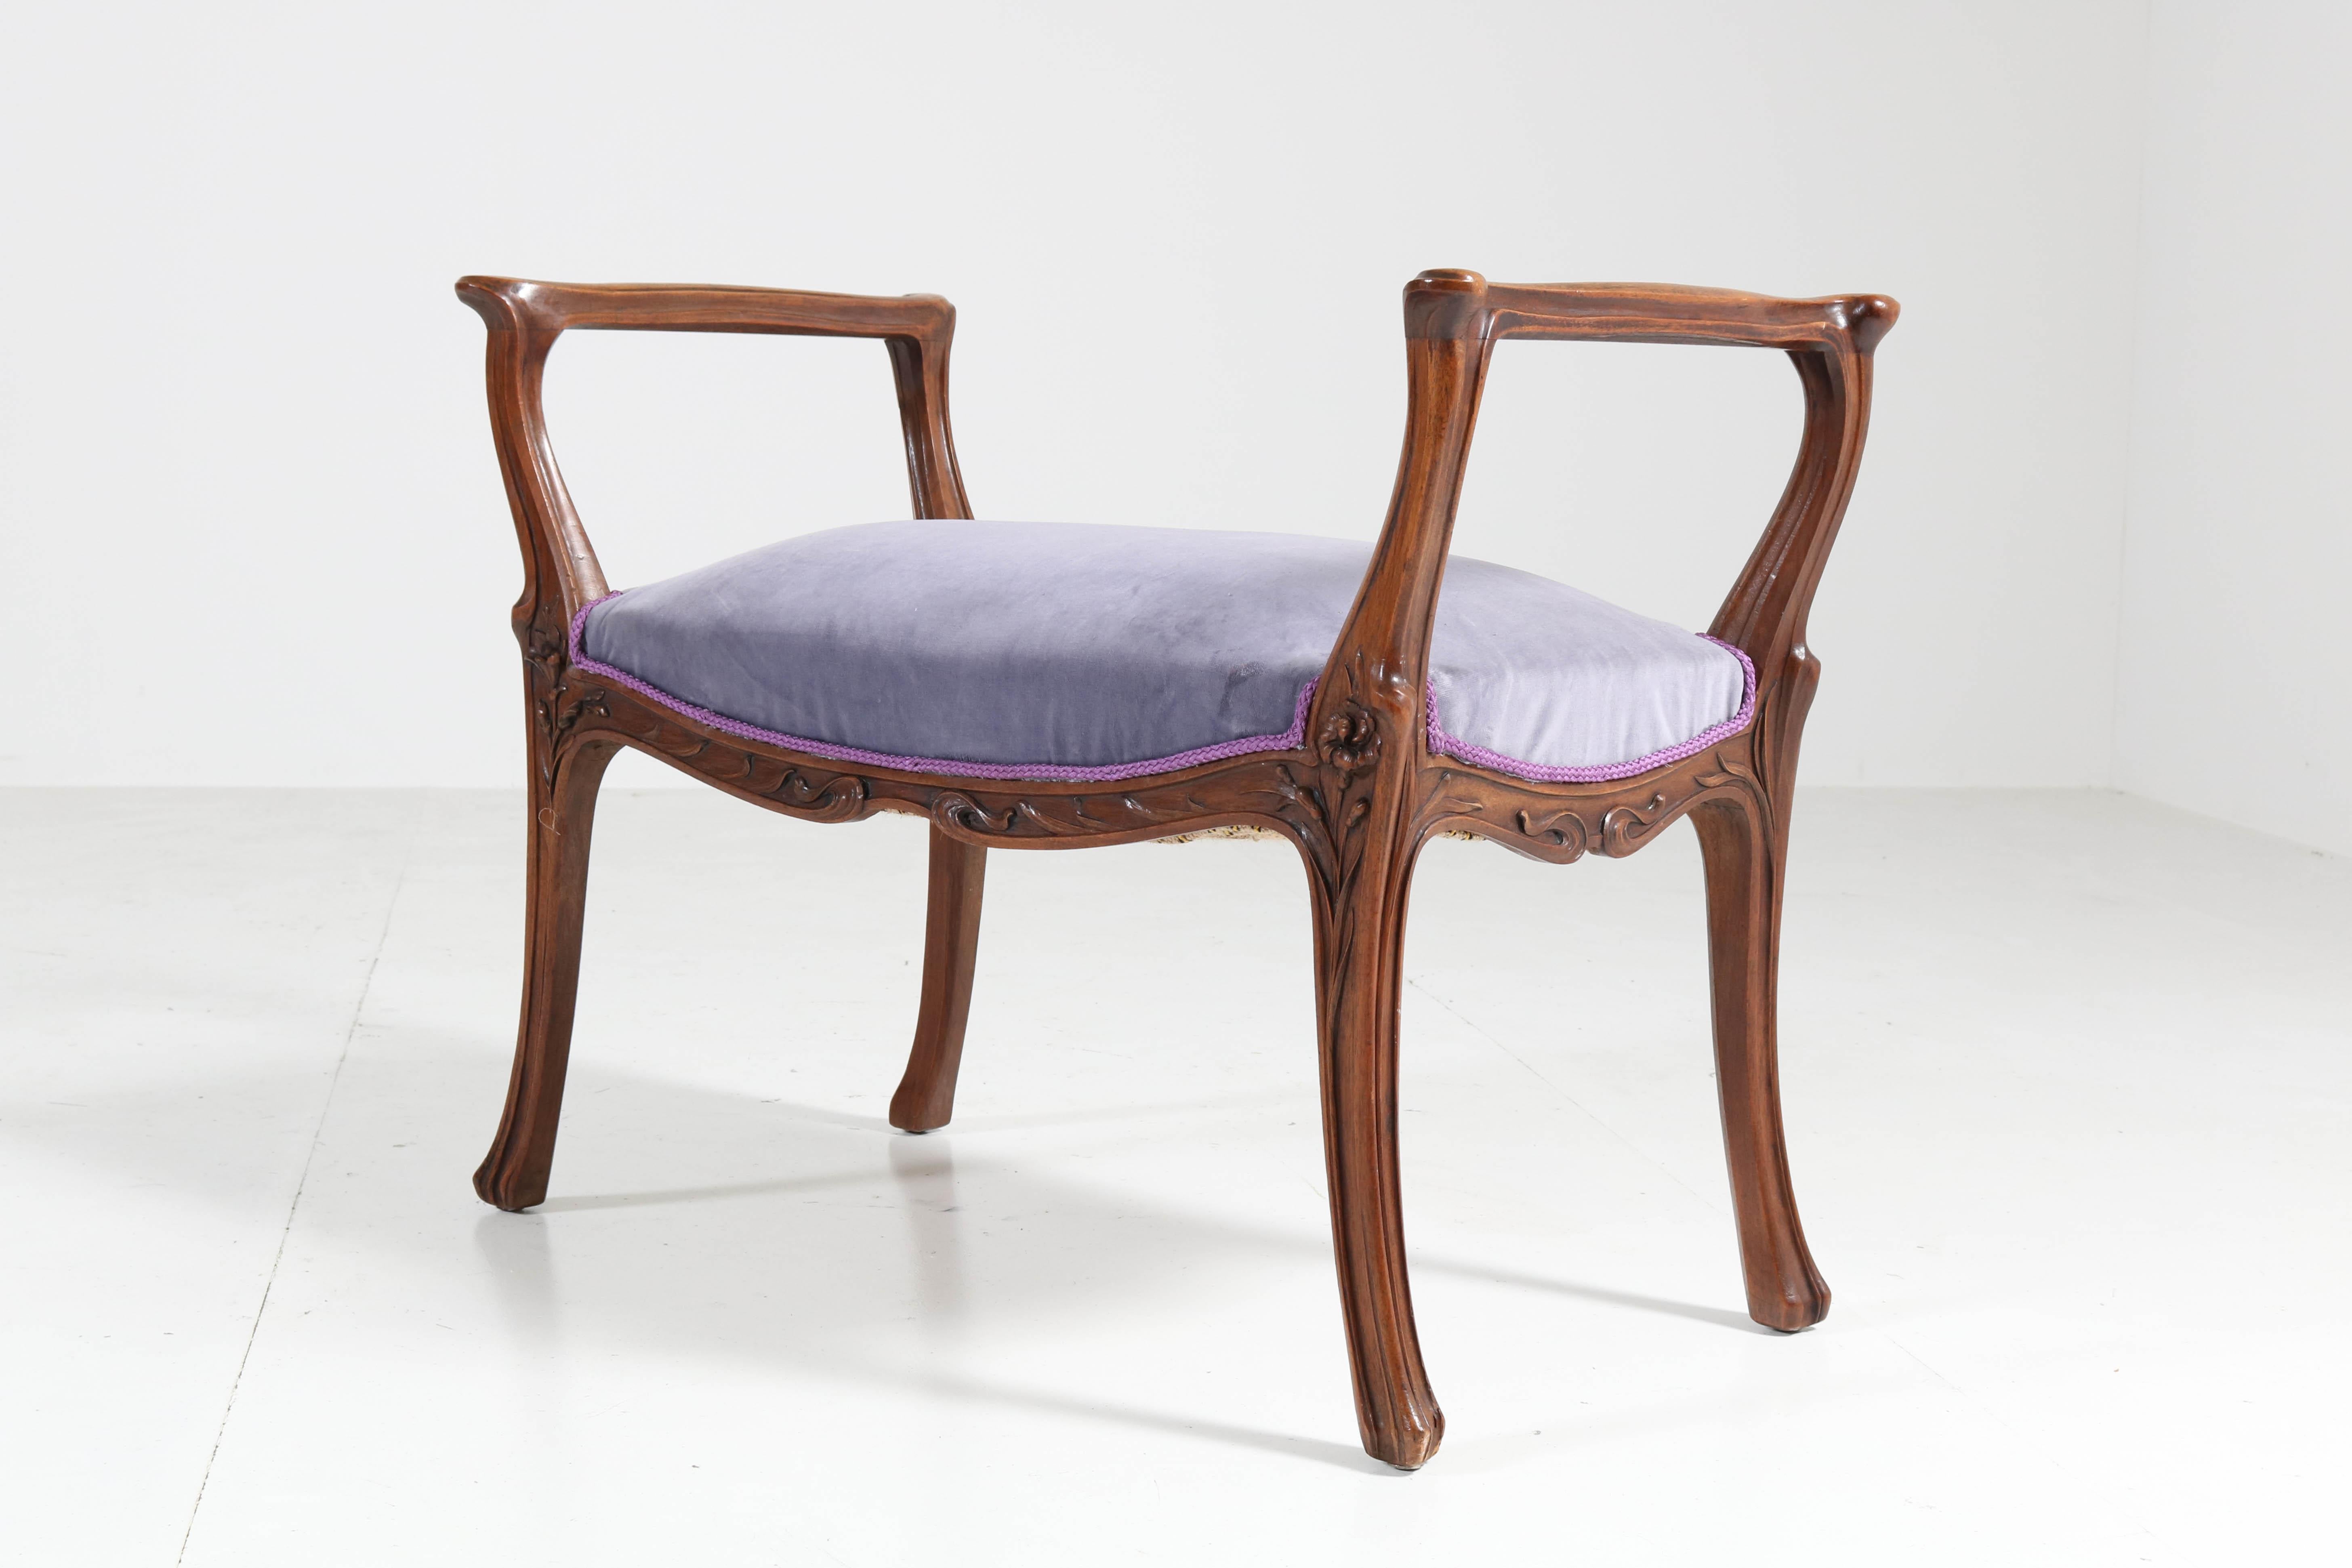 Velvet French Walnut Art Nouveau Bench or Stool with Armrests, 1900s